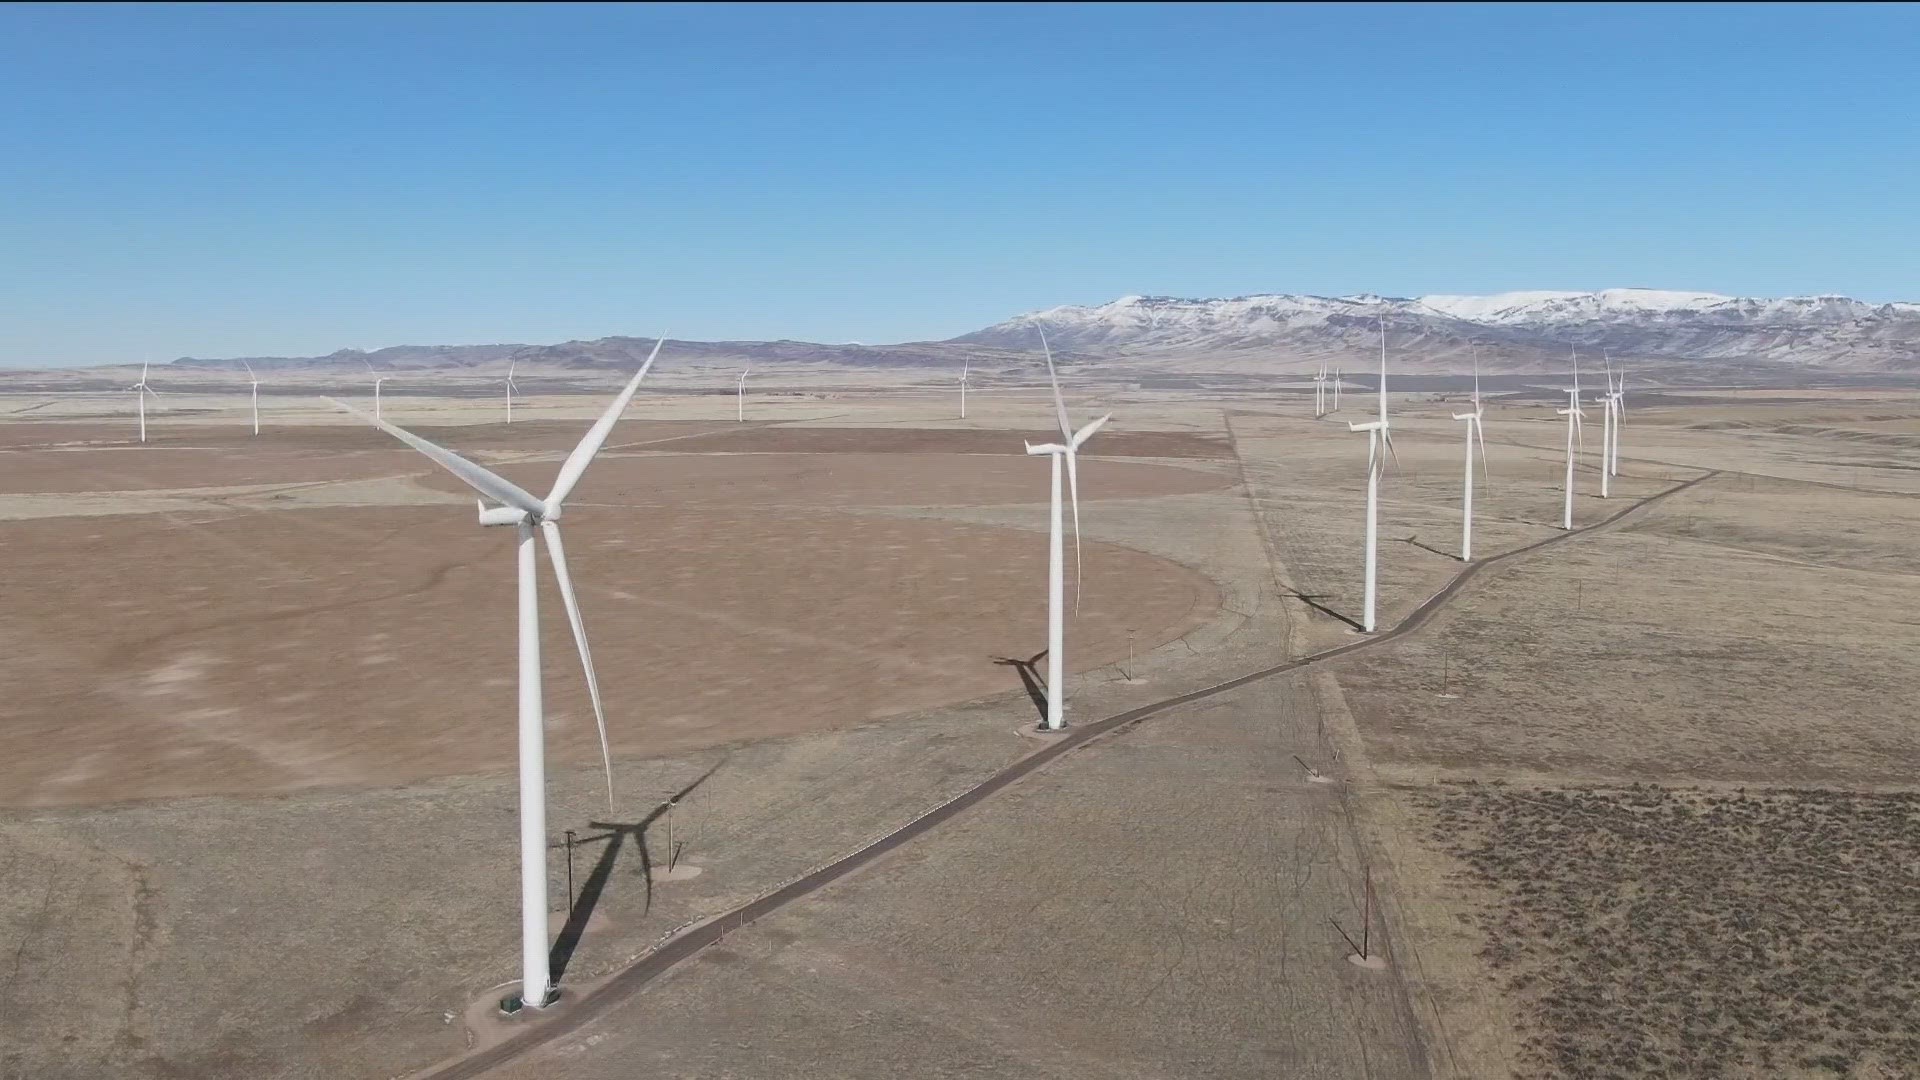 The proposed Lava Ridge Project spans 146,000 acres and will include 370 wind turbines compromised in the Minidoka National Historic Site.